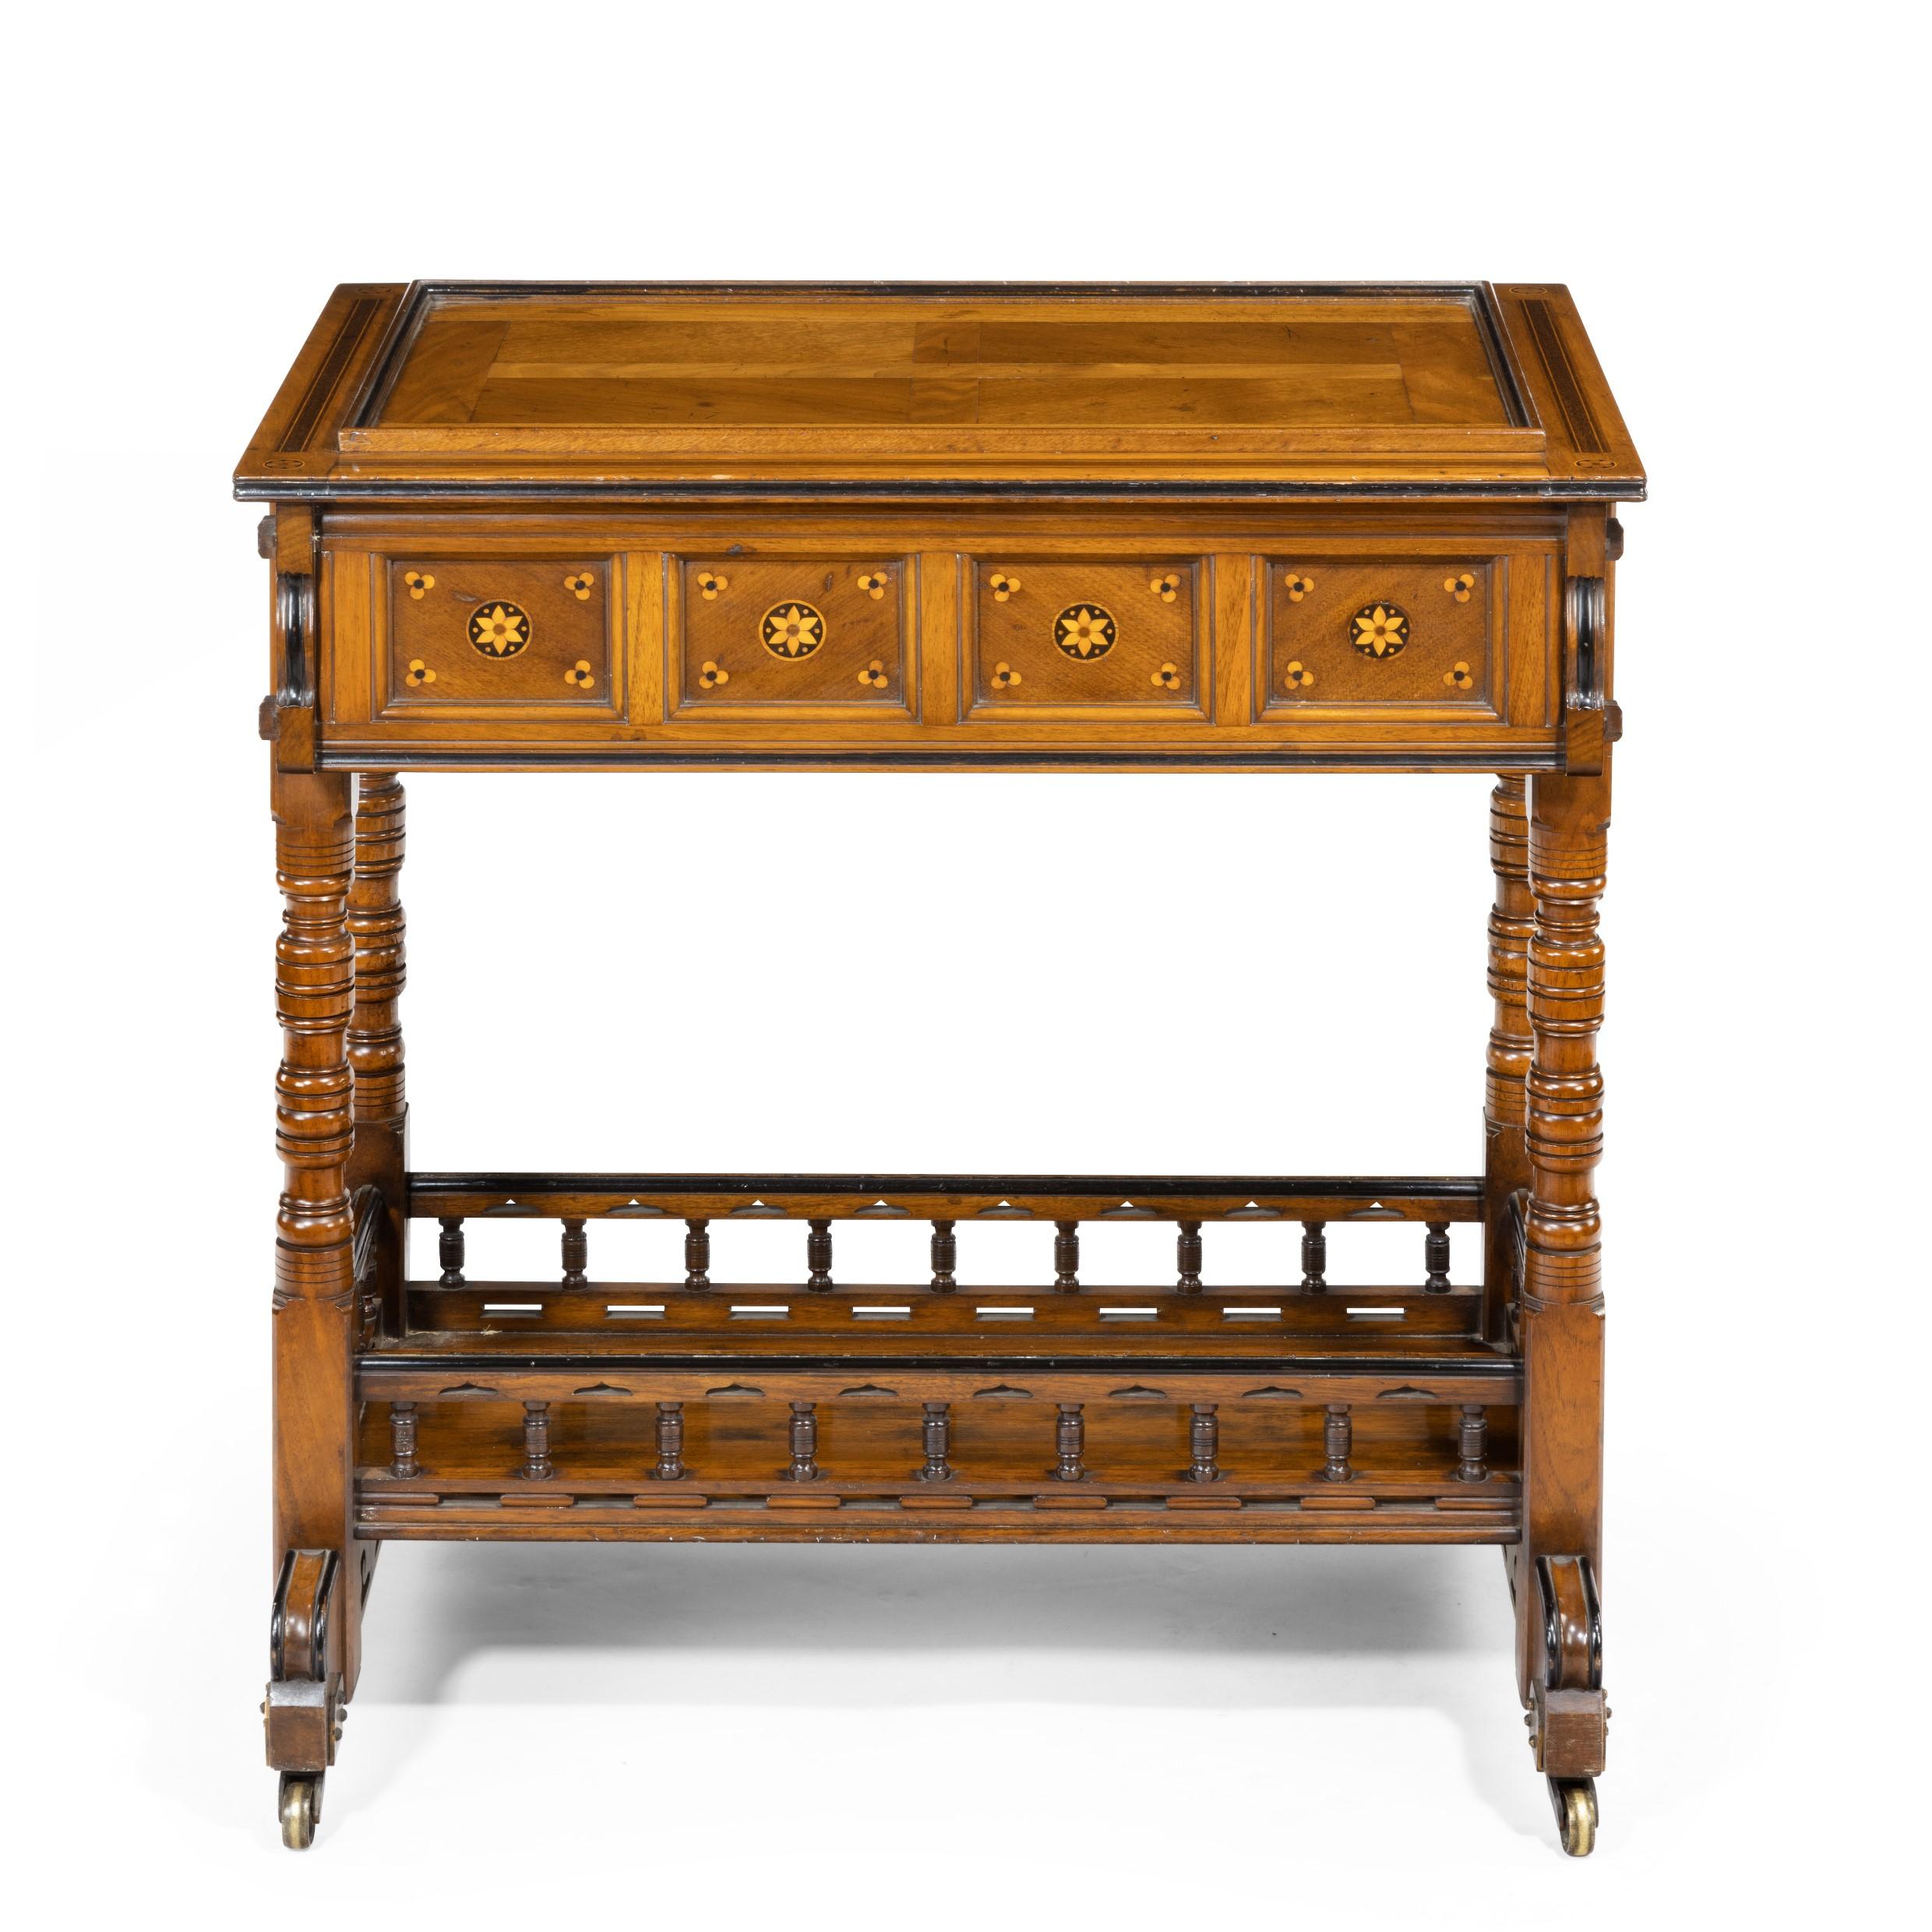 A walnut side table/jardinière by Gillows, probably after Augustus Pugin, the rectangular top lifting out to reveal a brass lining (replaced) for planting, raised upon turned legs enclosing a galleried shelf above crossbars with the original